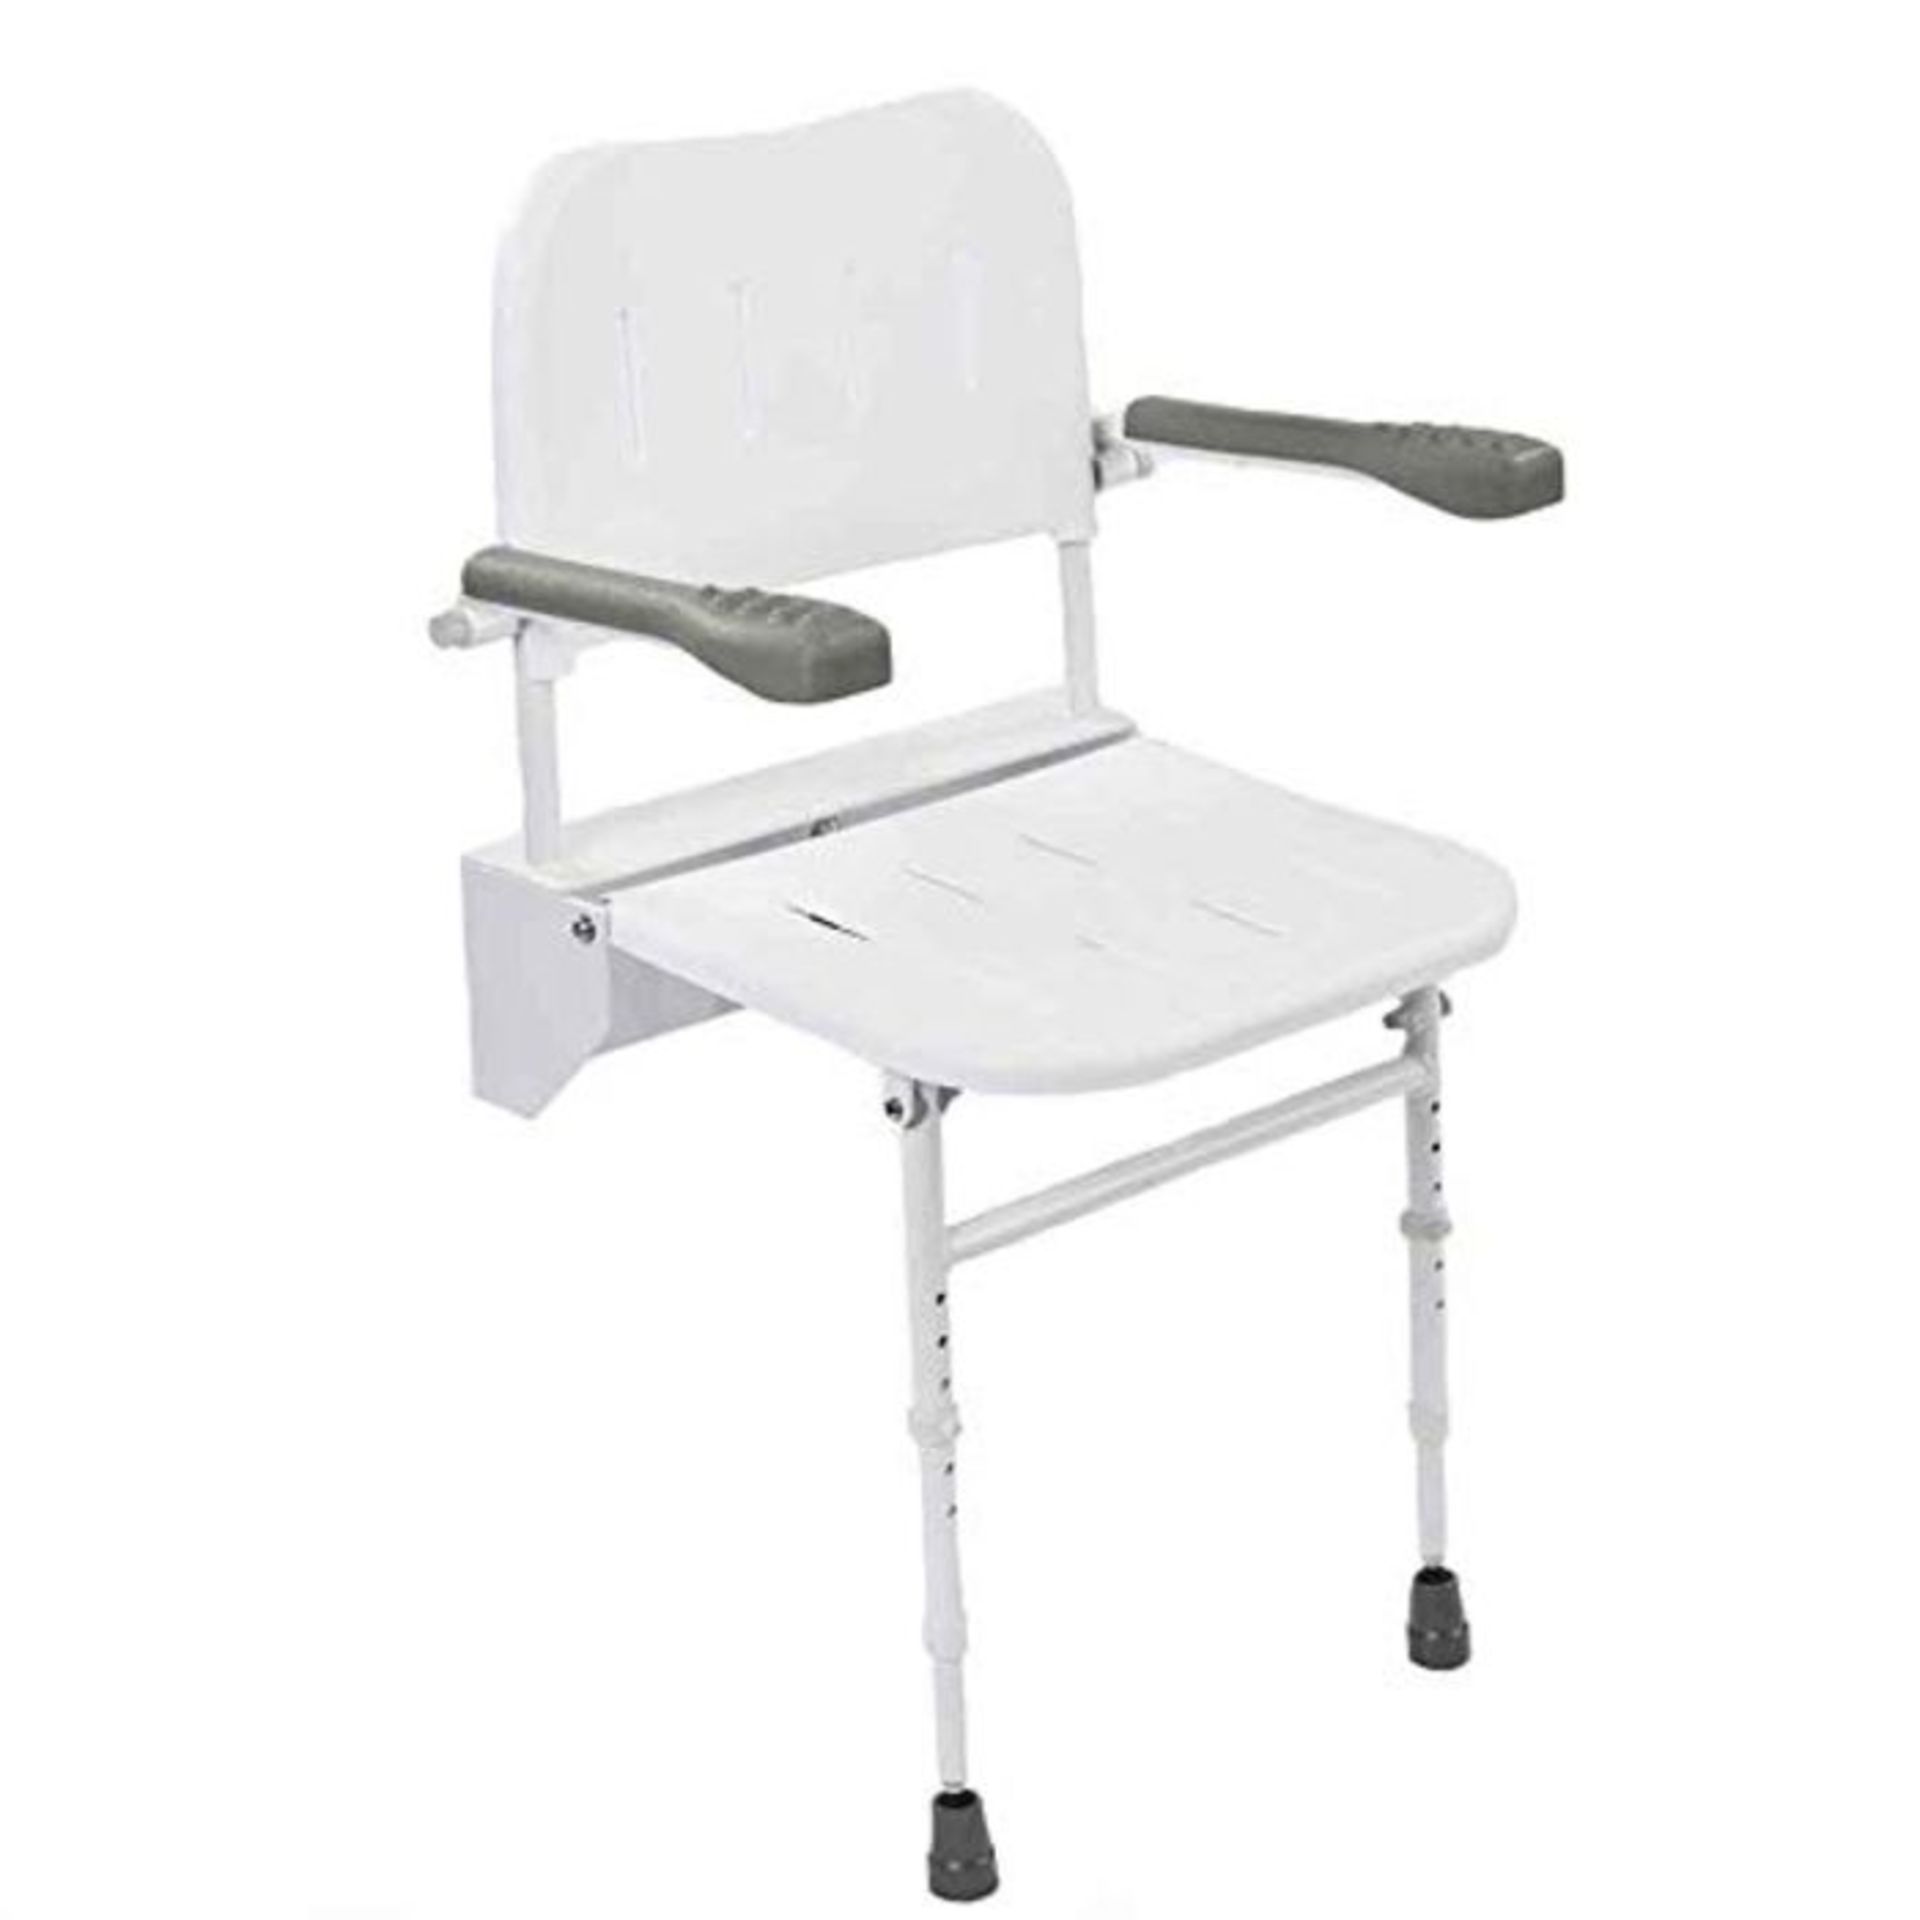 RRP £87.00 NRS Healthcare Wall Mounted Folding Shower Seat M53370 - with Legs, Back and Arms